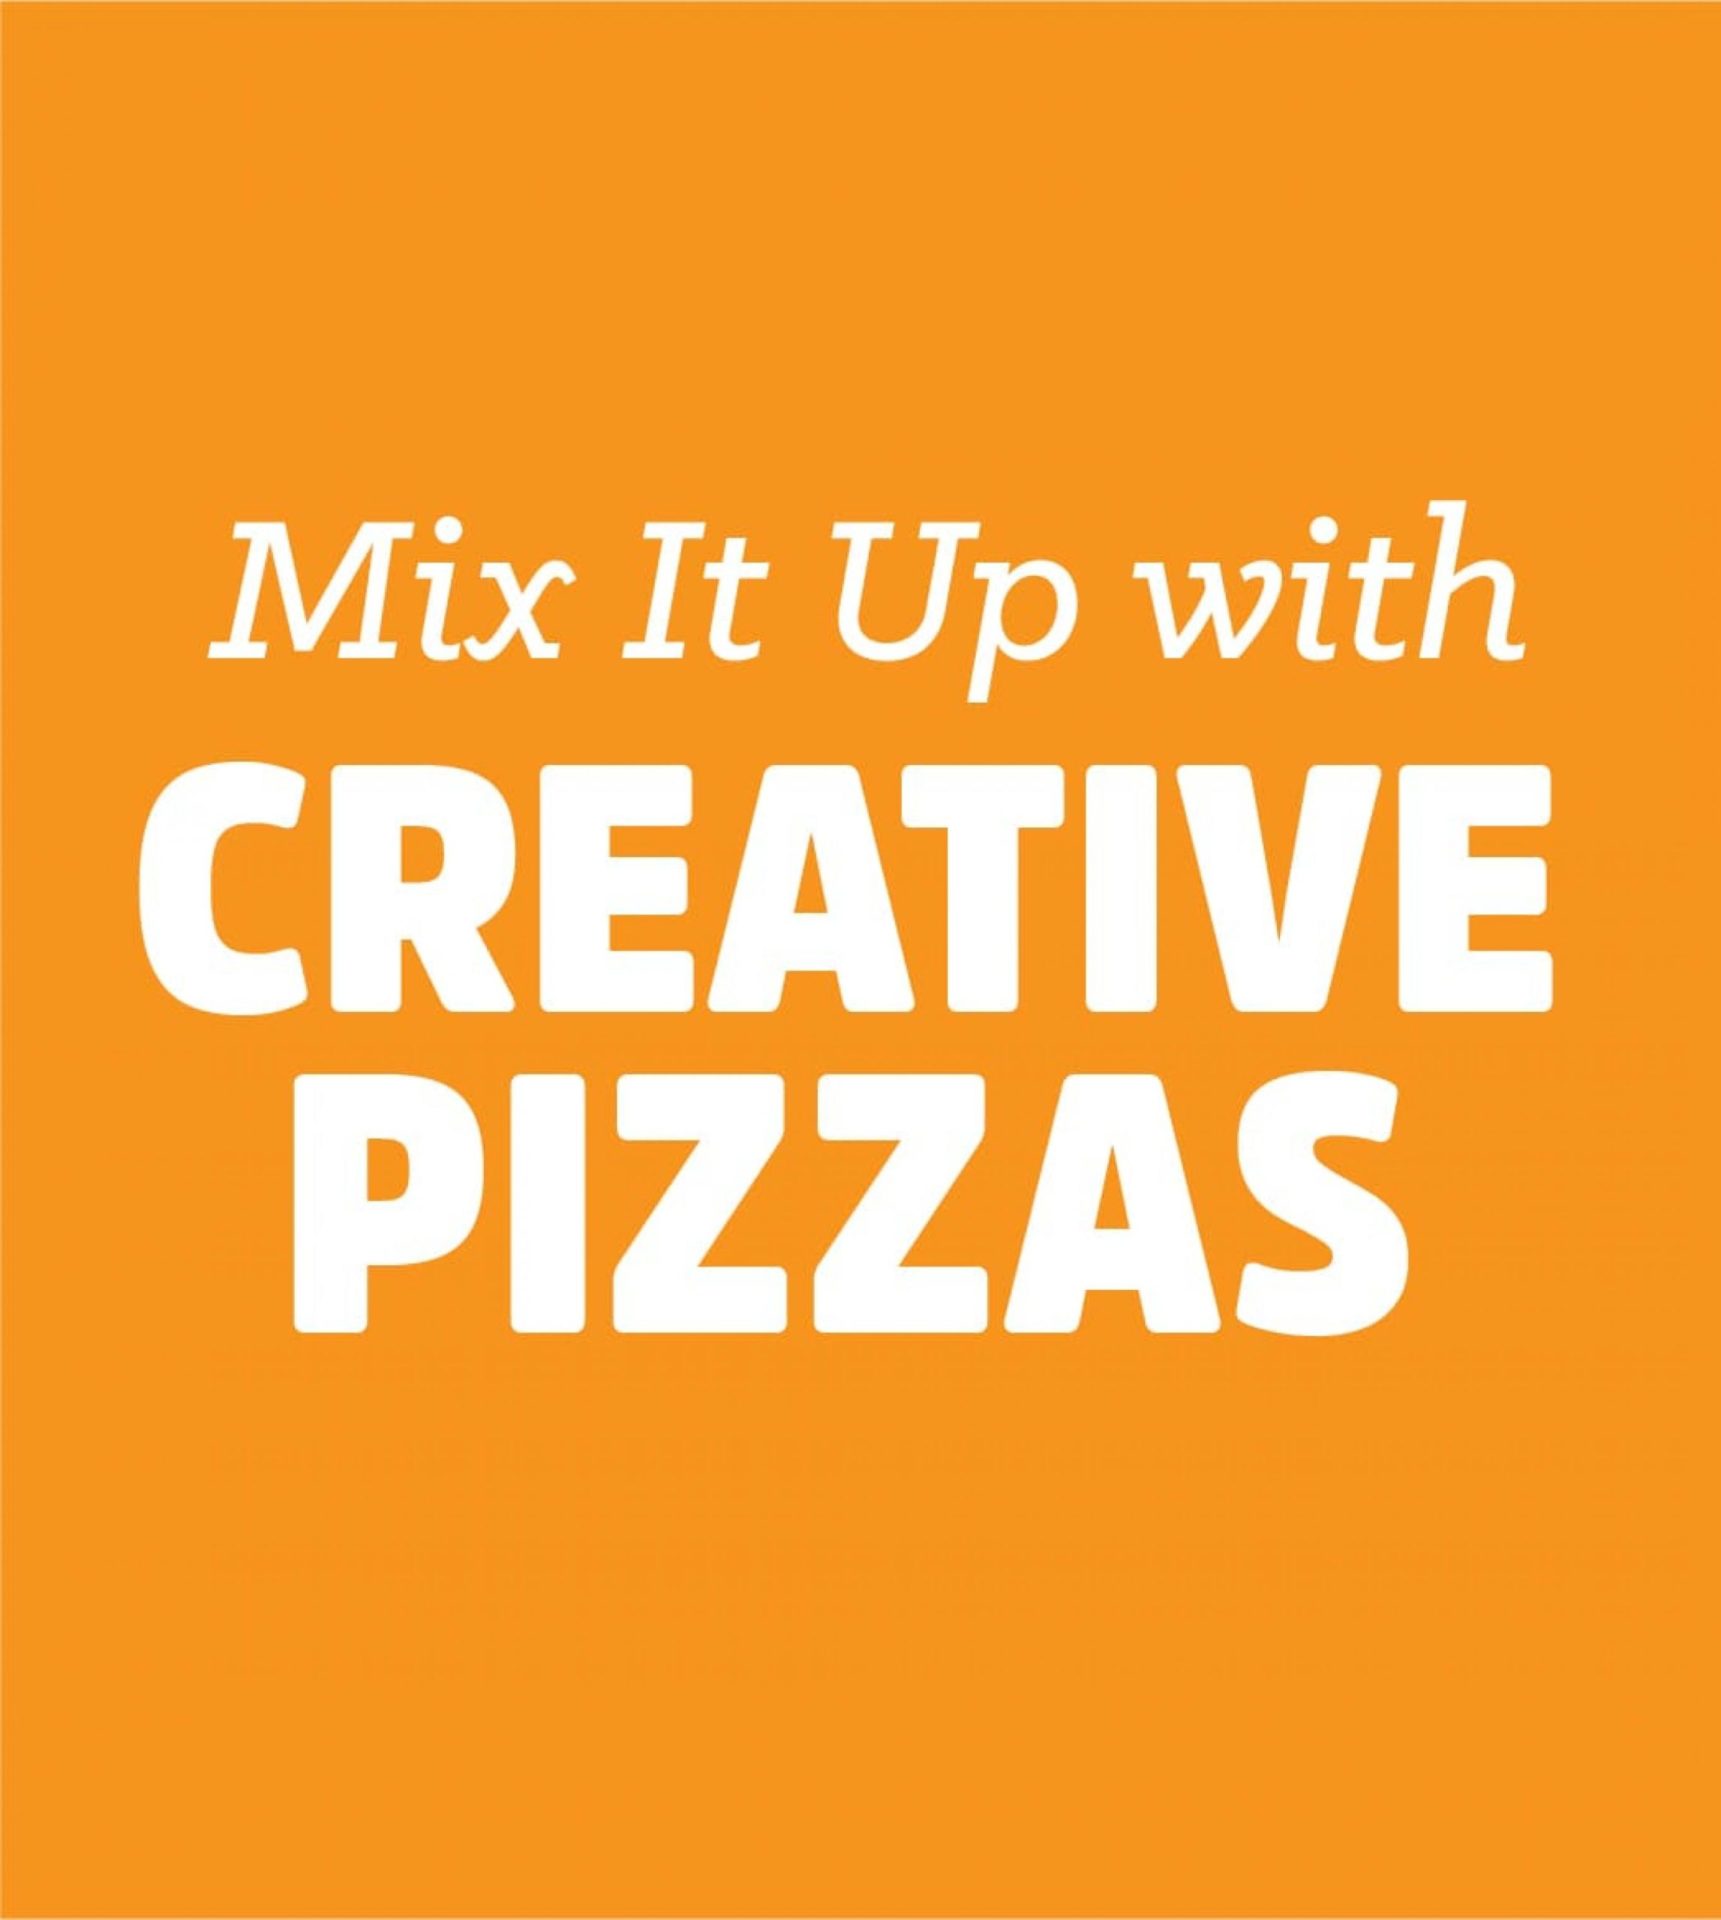 Mix It Up with CREATIVE PIZZAS